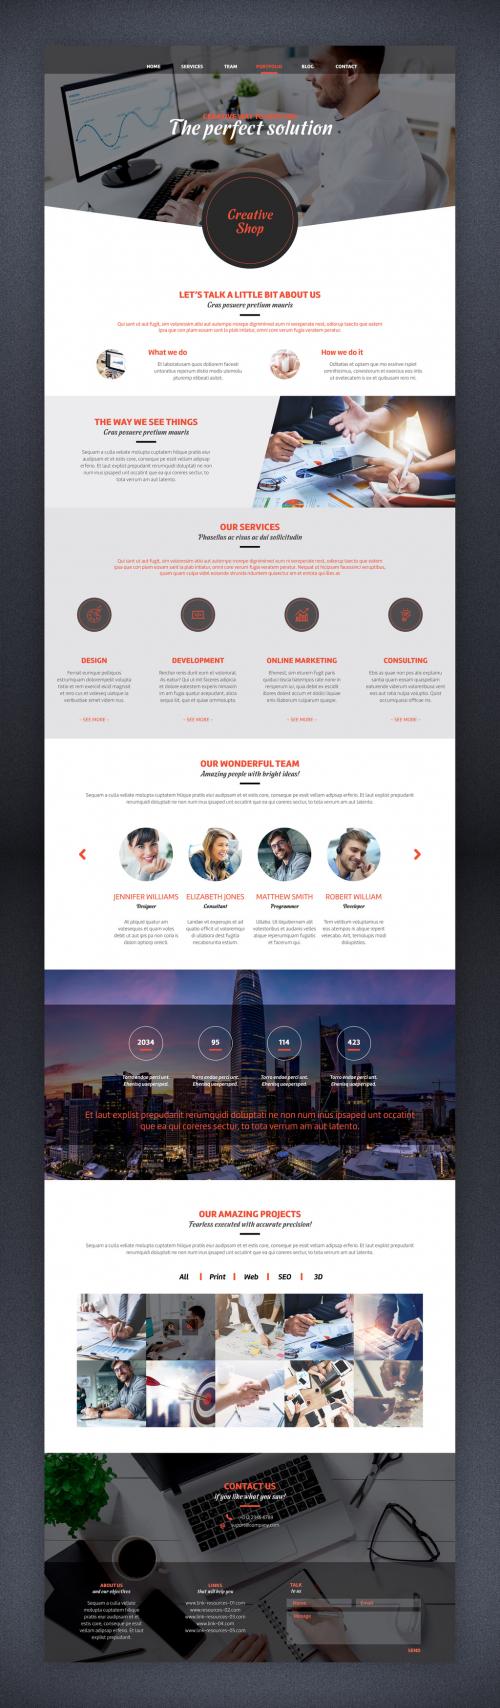 Adobe Stock - Website Layout with Red and Gray Accents - 389938601